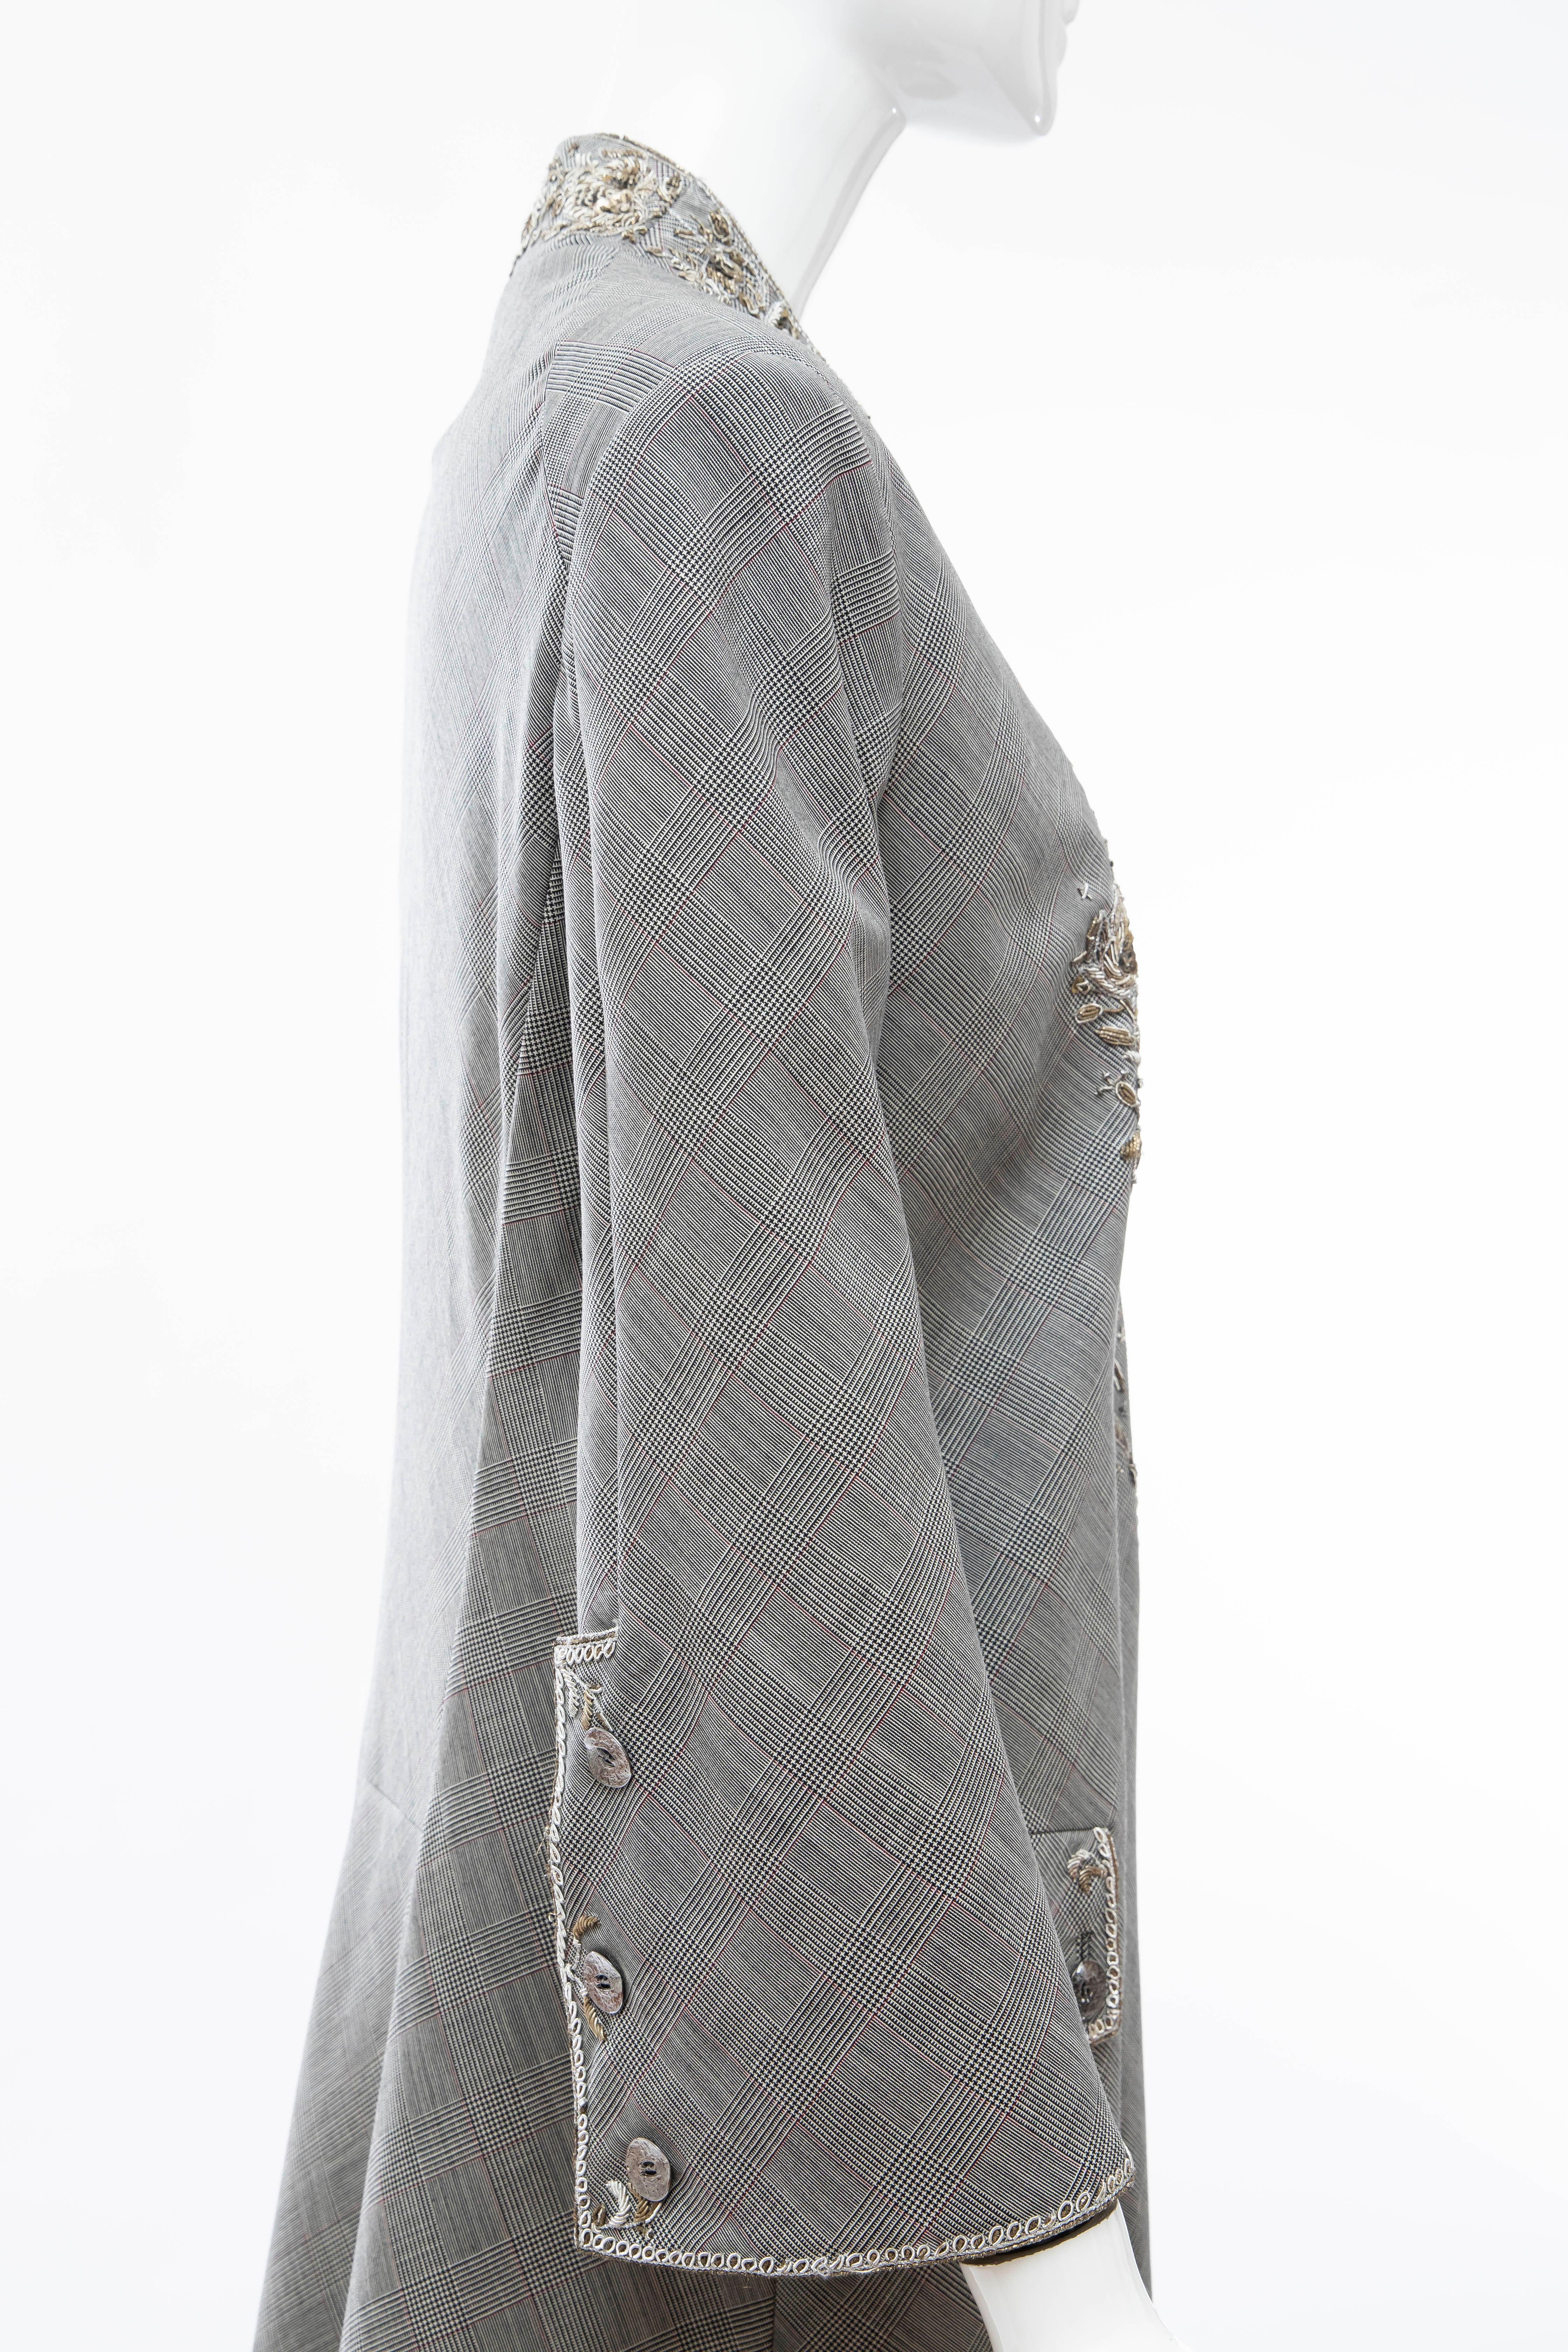 Alexander McQueen Wessex Glen Plaid Bullion Wire Embroidered Coat, Spring 2002 For Sale 1